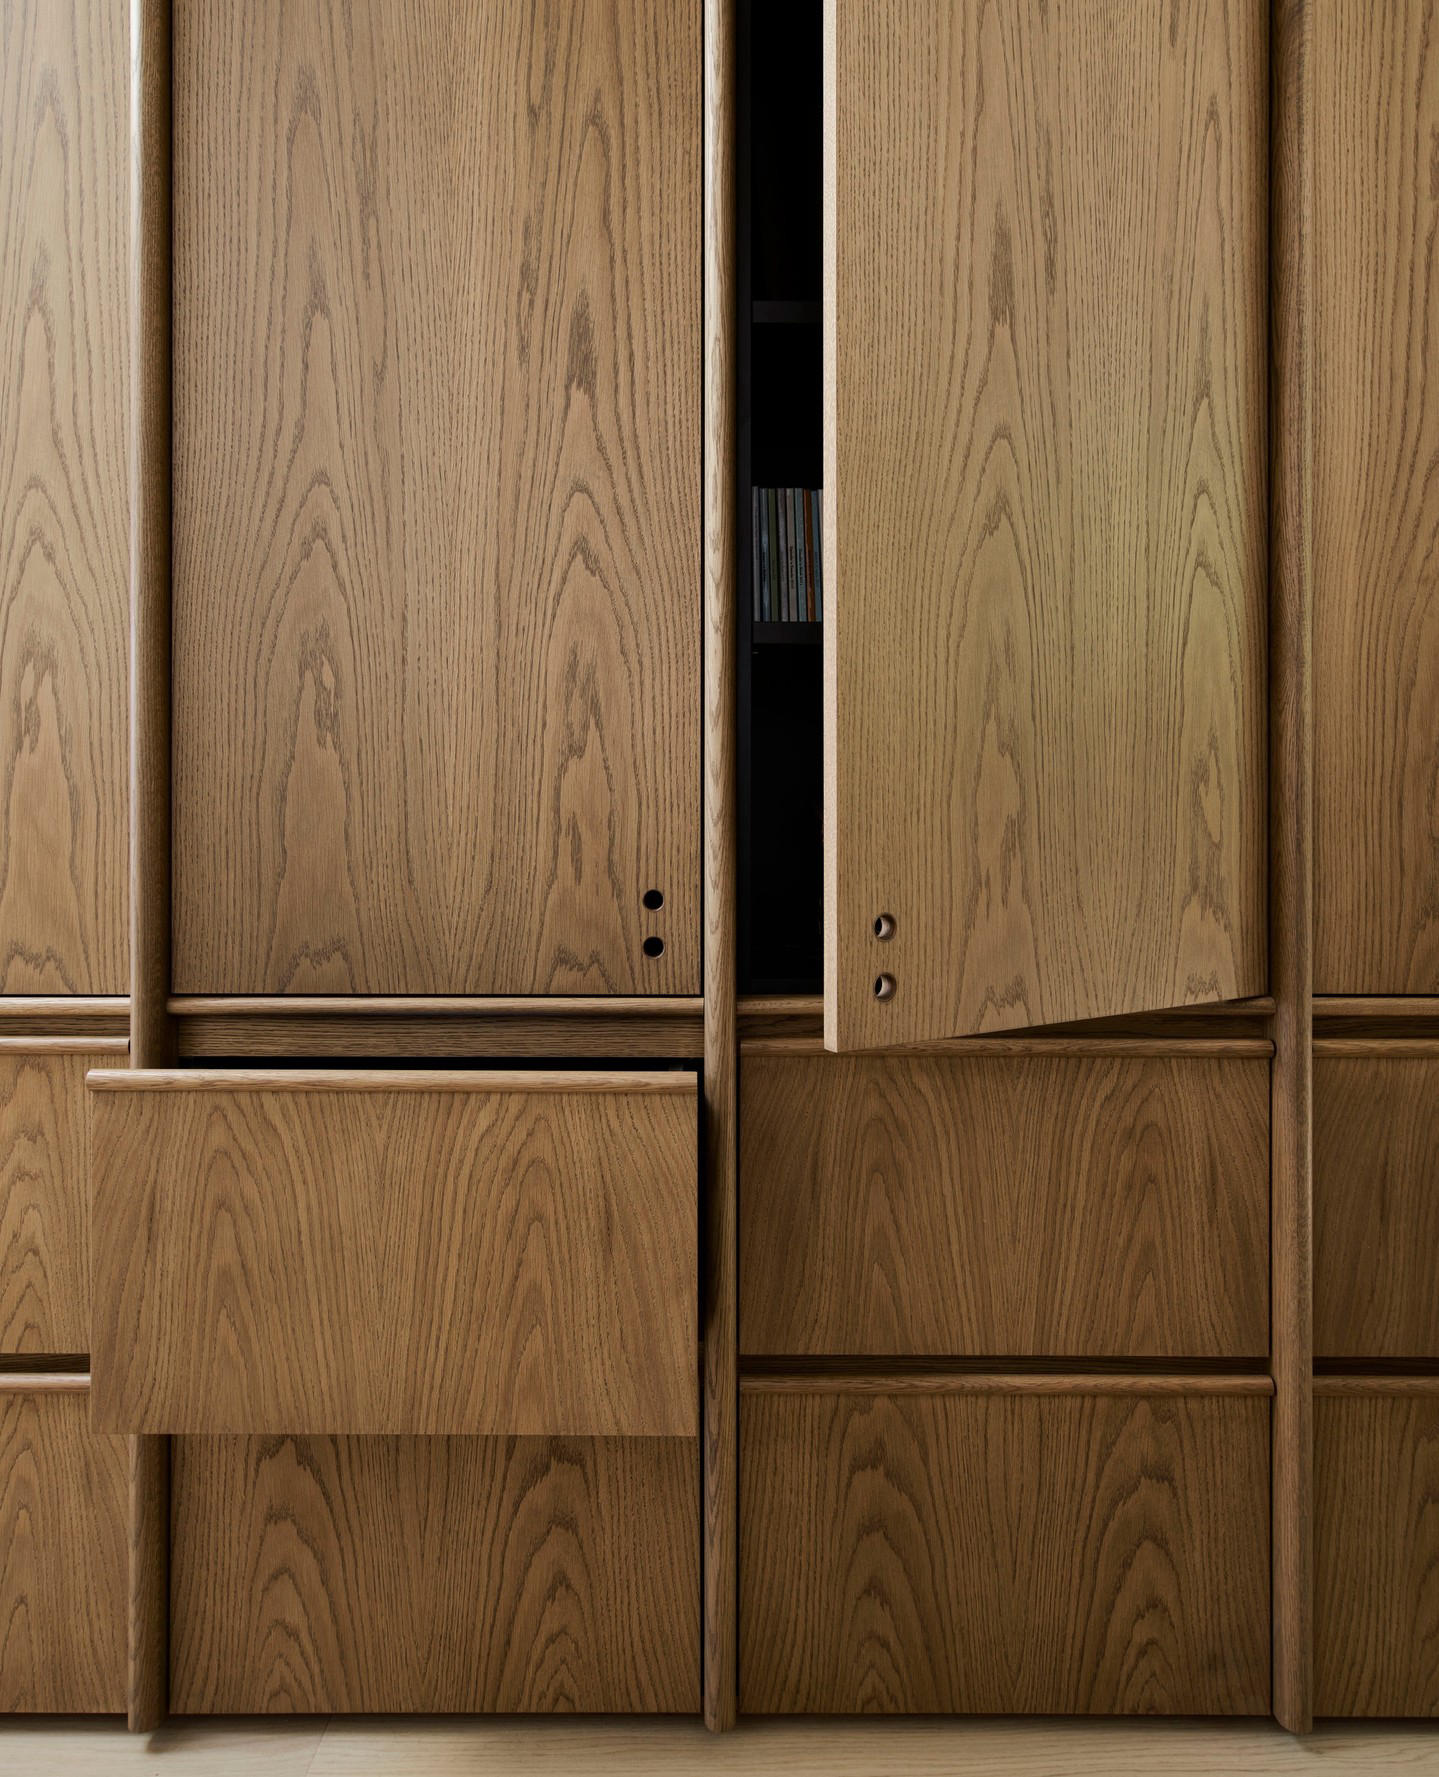 image  1 decus - Solid oak joinery detail from the study in our latest project